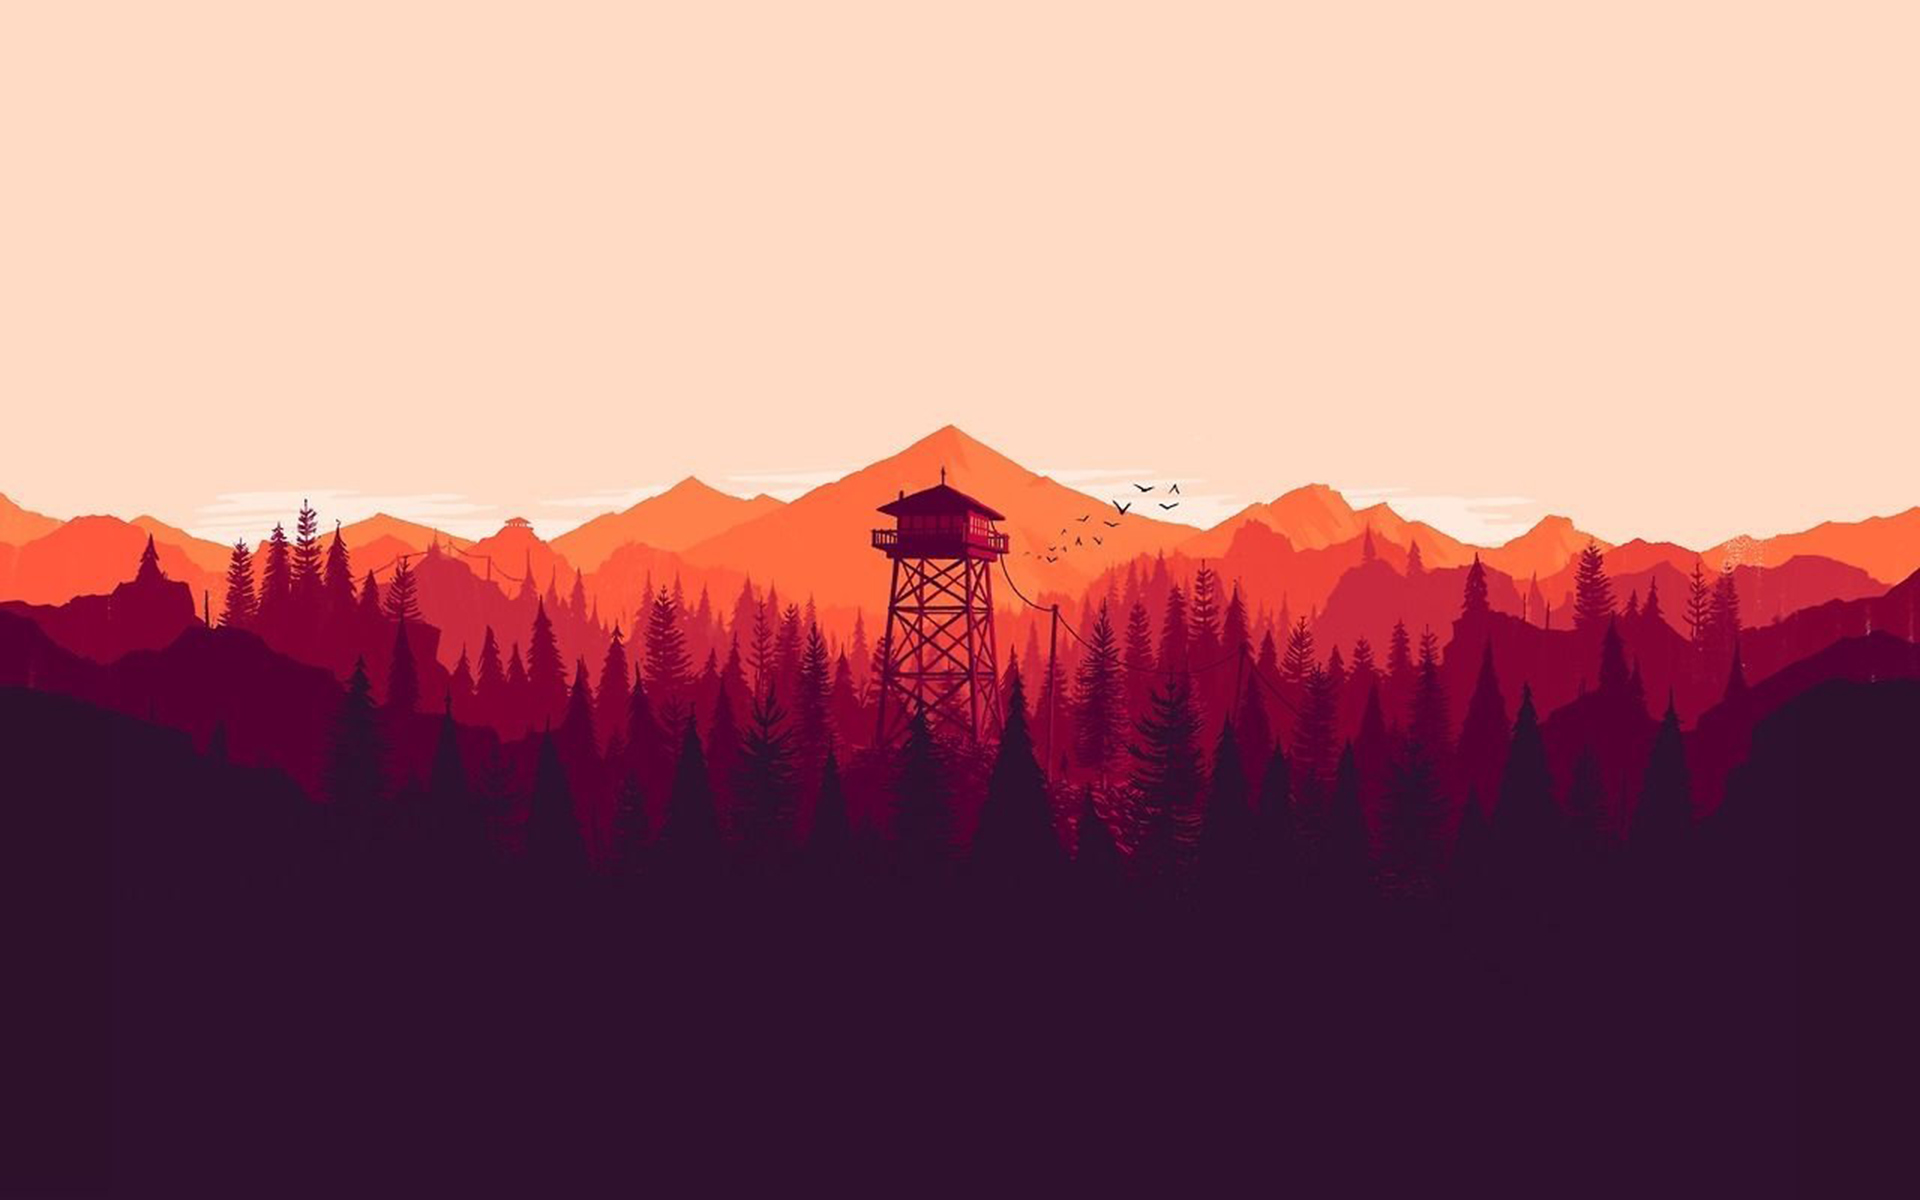 Aesthetic Red 4K Wallpapers